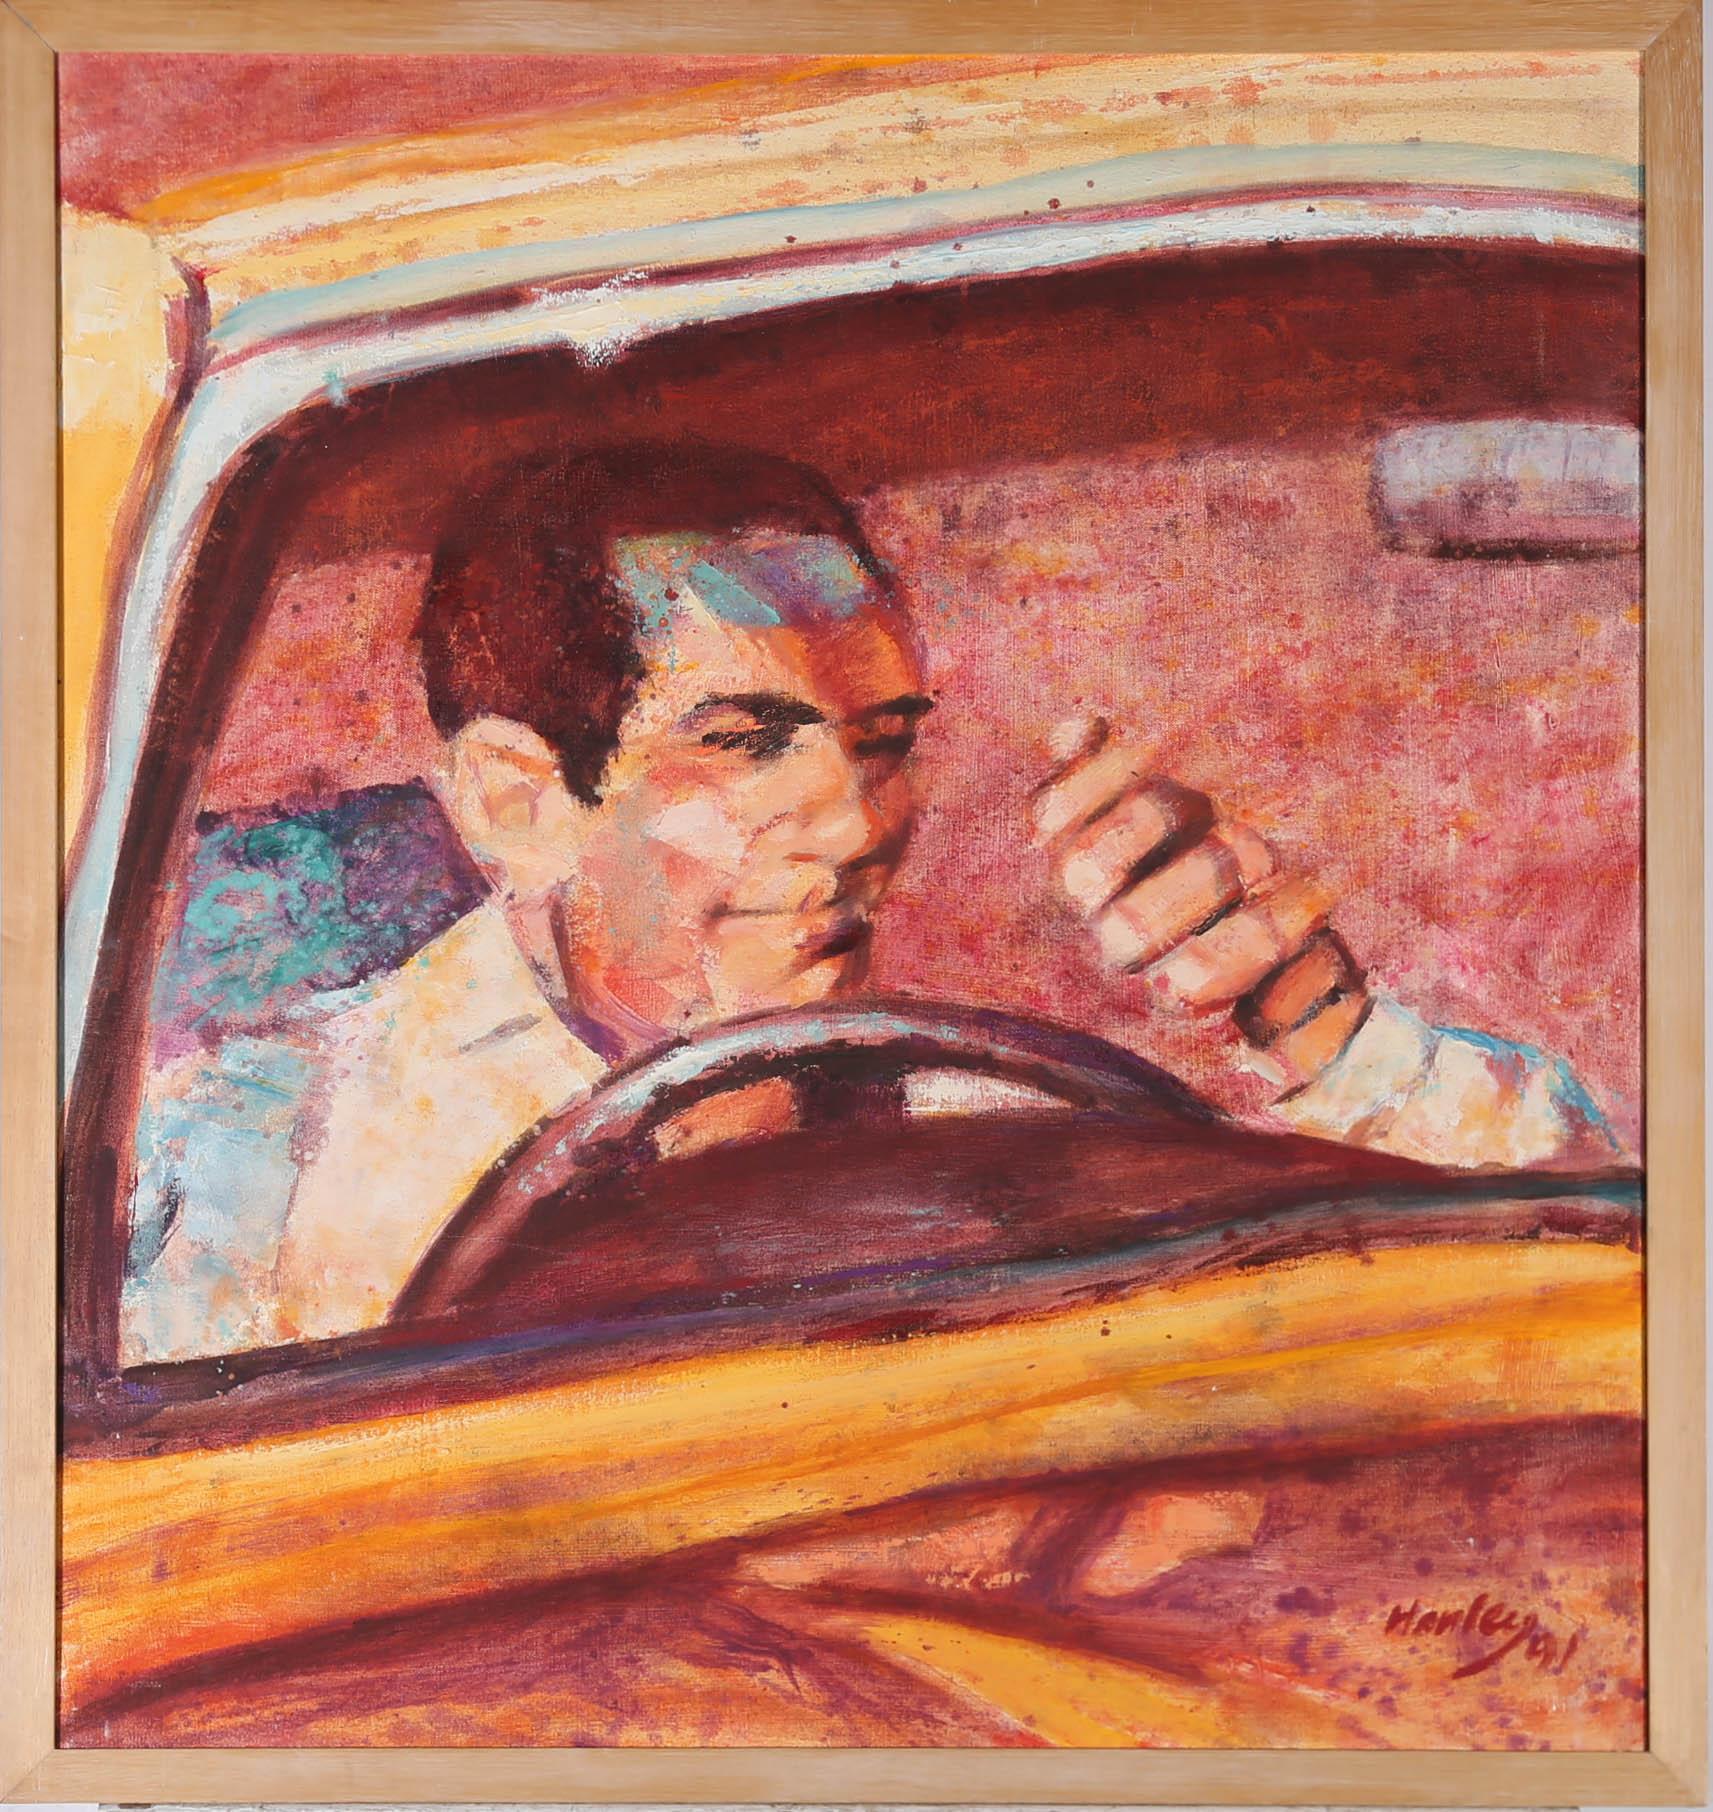 A colourful window screen view of a gentleman driving an orange car by Clifford Hanley. The painting is signed and dated to the lower right-hand corner. Well presented in a simple wooden frame. On canvas on stretchers.